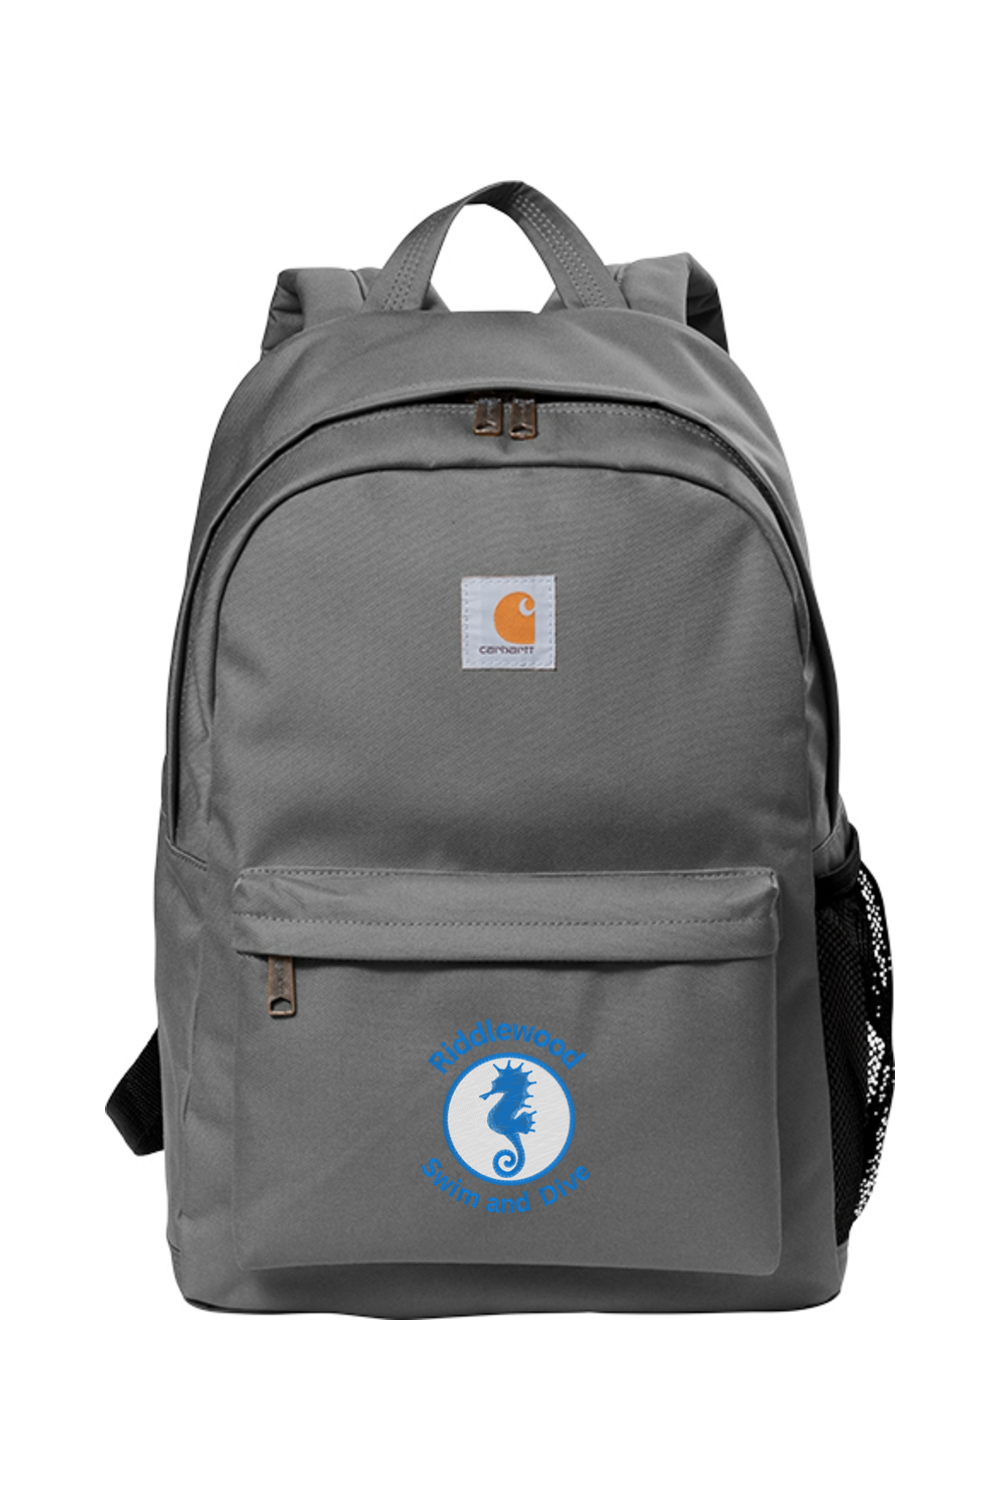 Riddlewood Carhartt Canvas Backpack